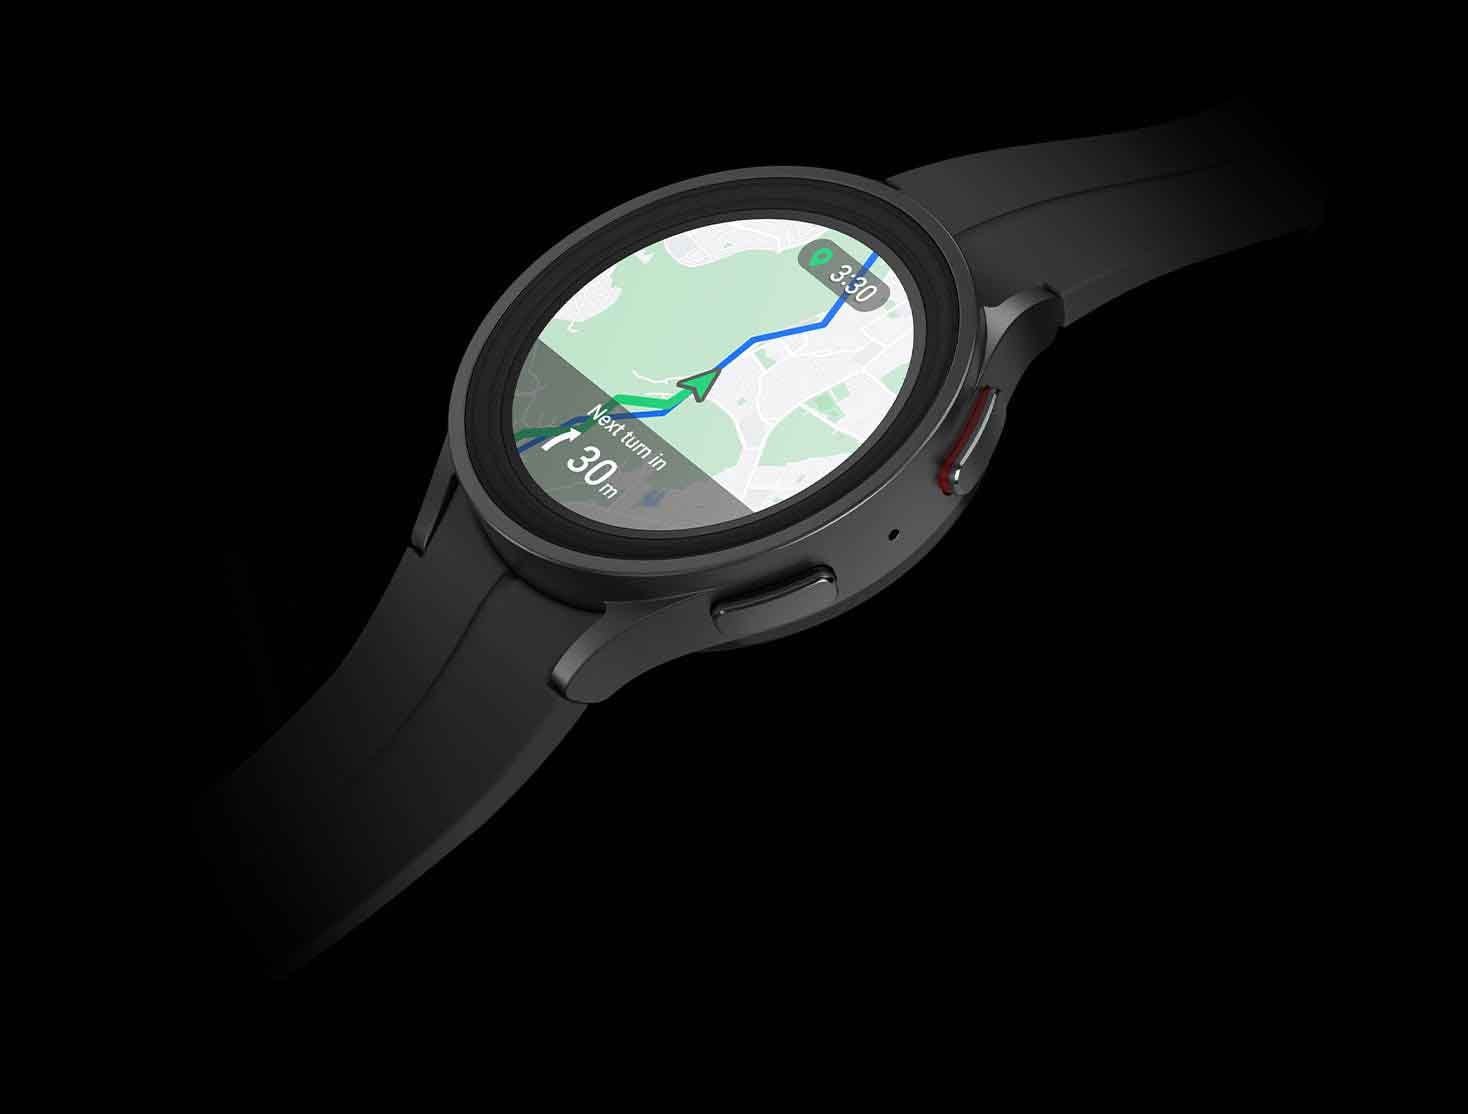 Galaxy Watch5 Pro in black titanium, its front displays a map with turn-by-turn navigation.